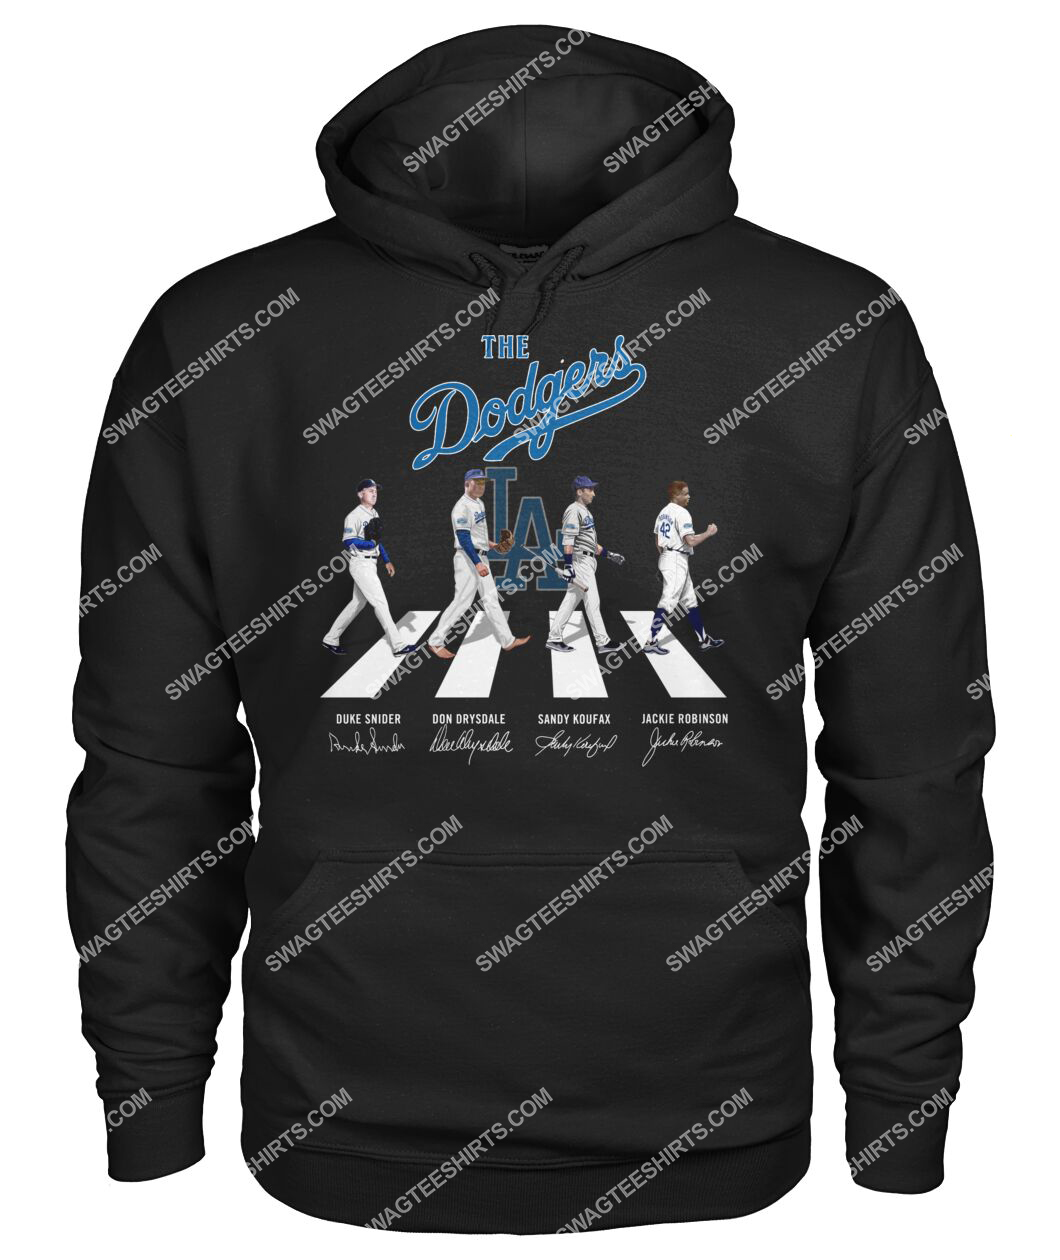 abbey road the los angeles dodgers signatures hoodie 1